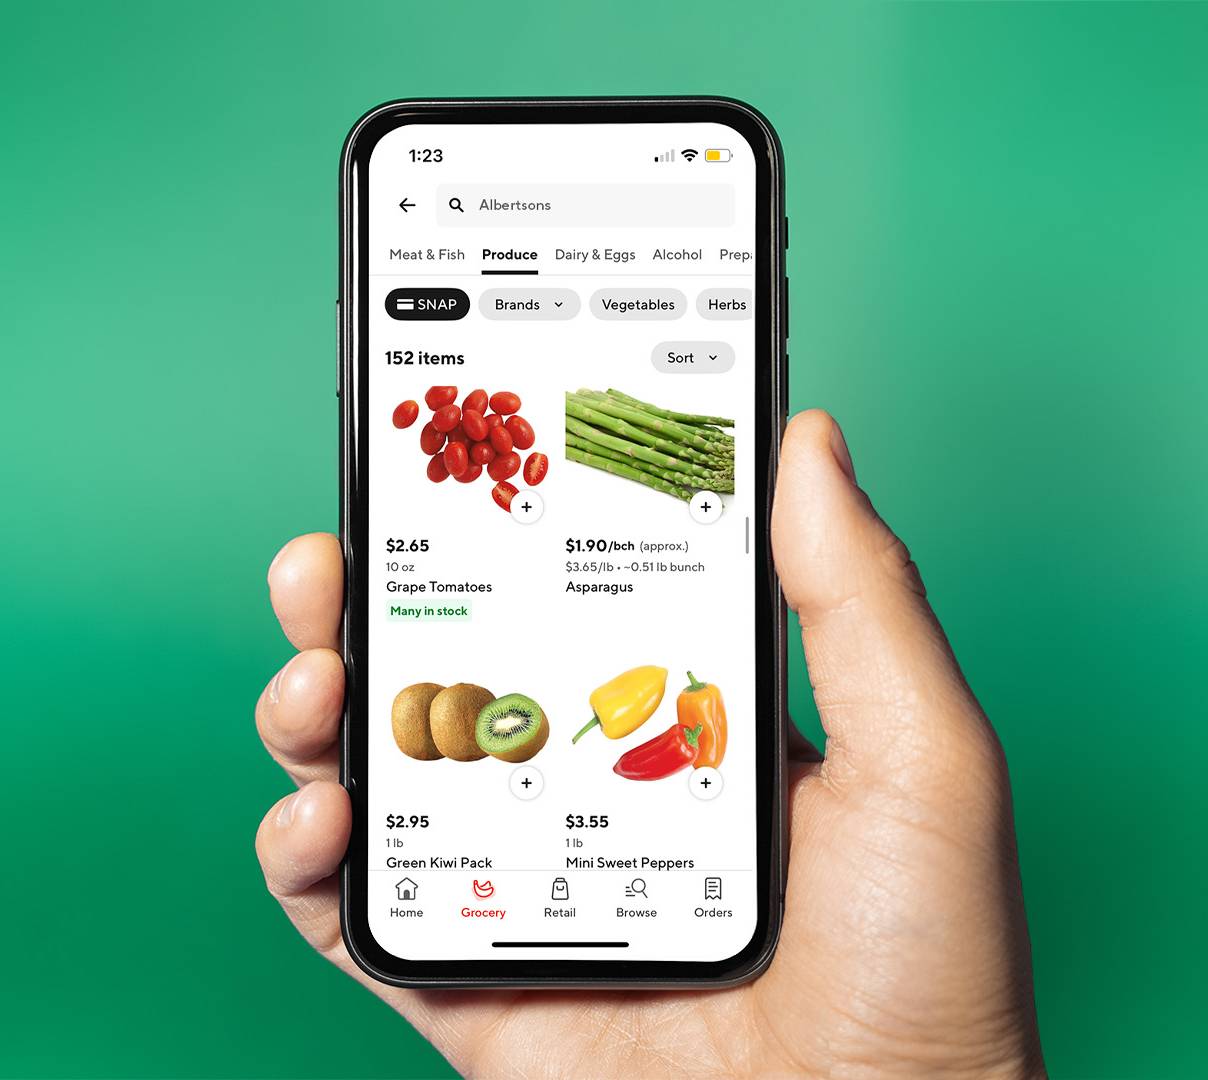 DoorDash Expands Food Access for SNAP Customers With New Grocery Partners